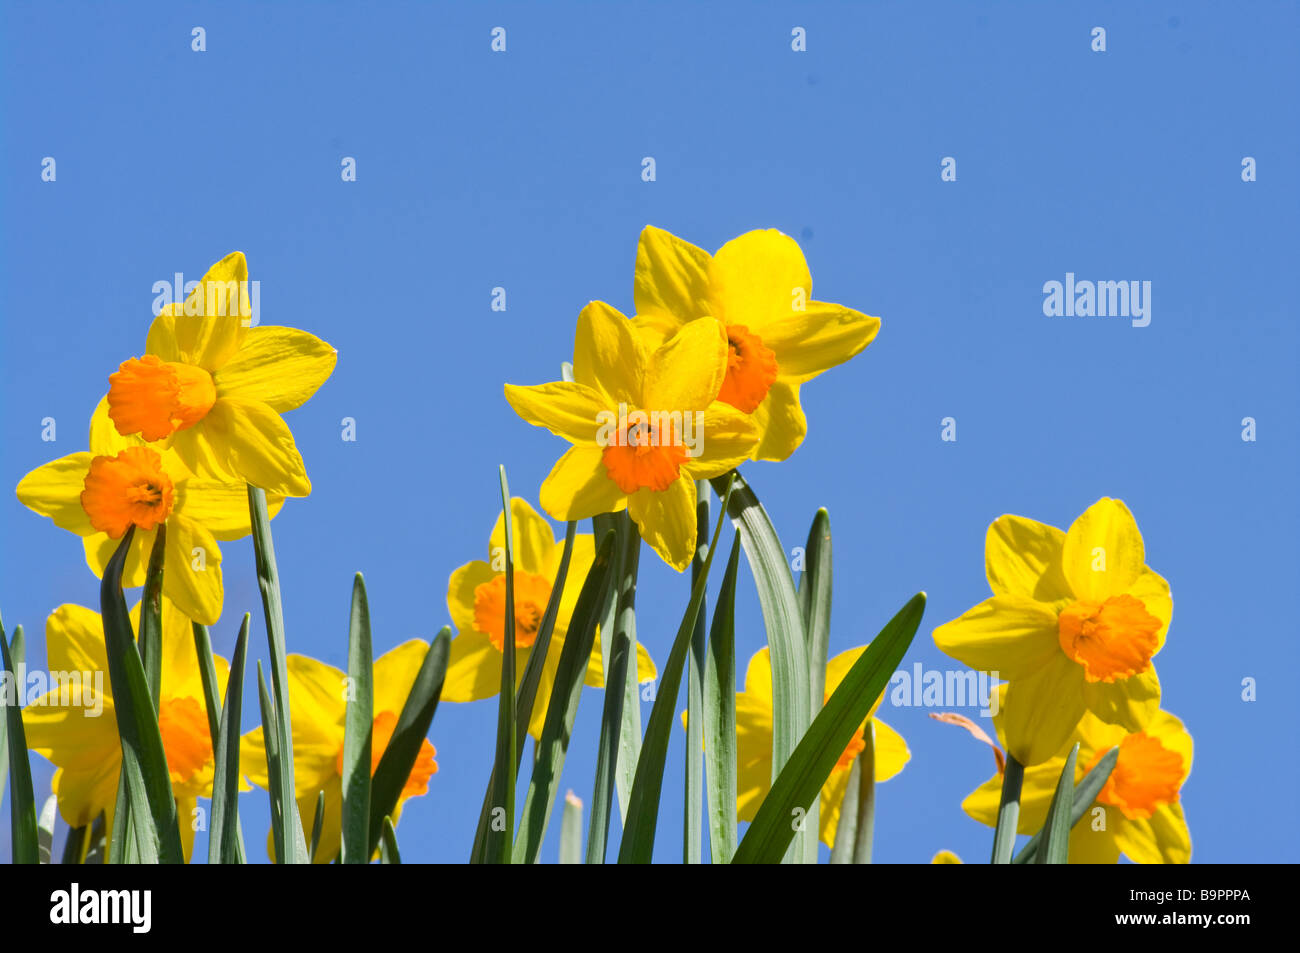 Spring Daffodils against a Blue Sky Narcissus Stock Photo